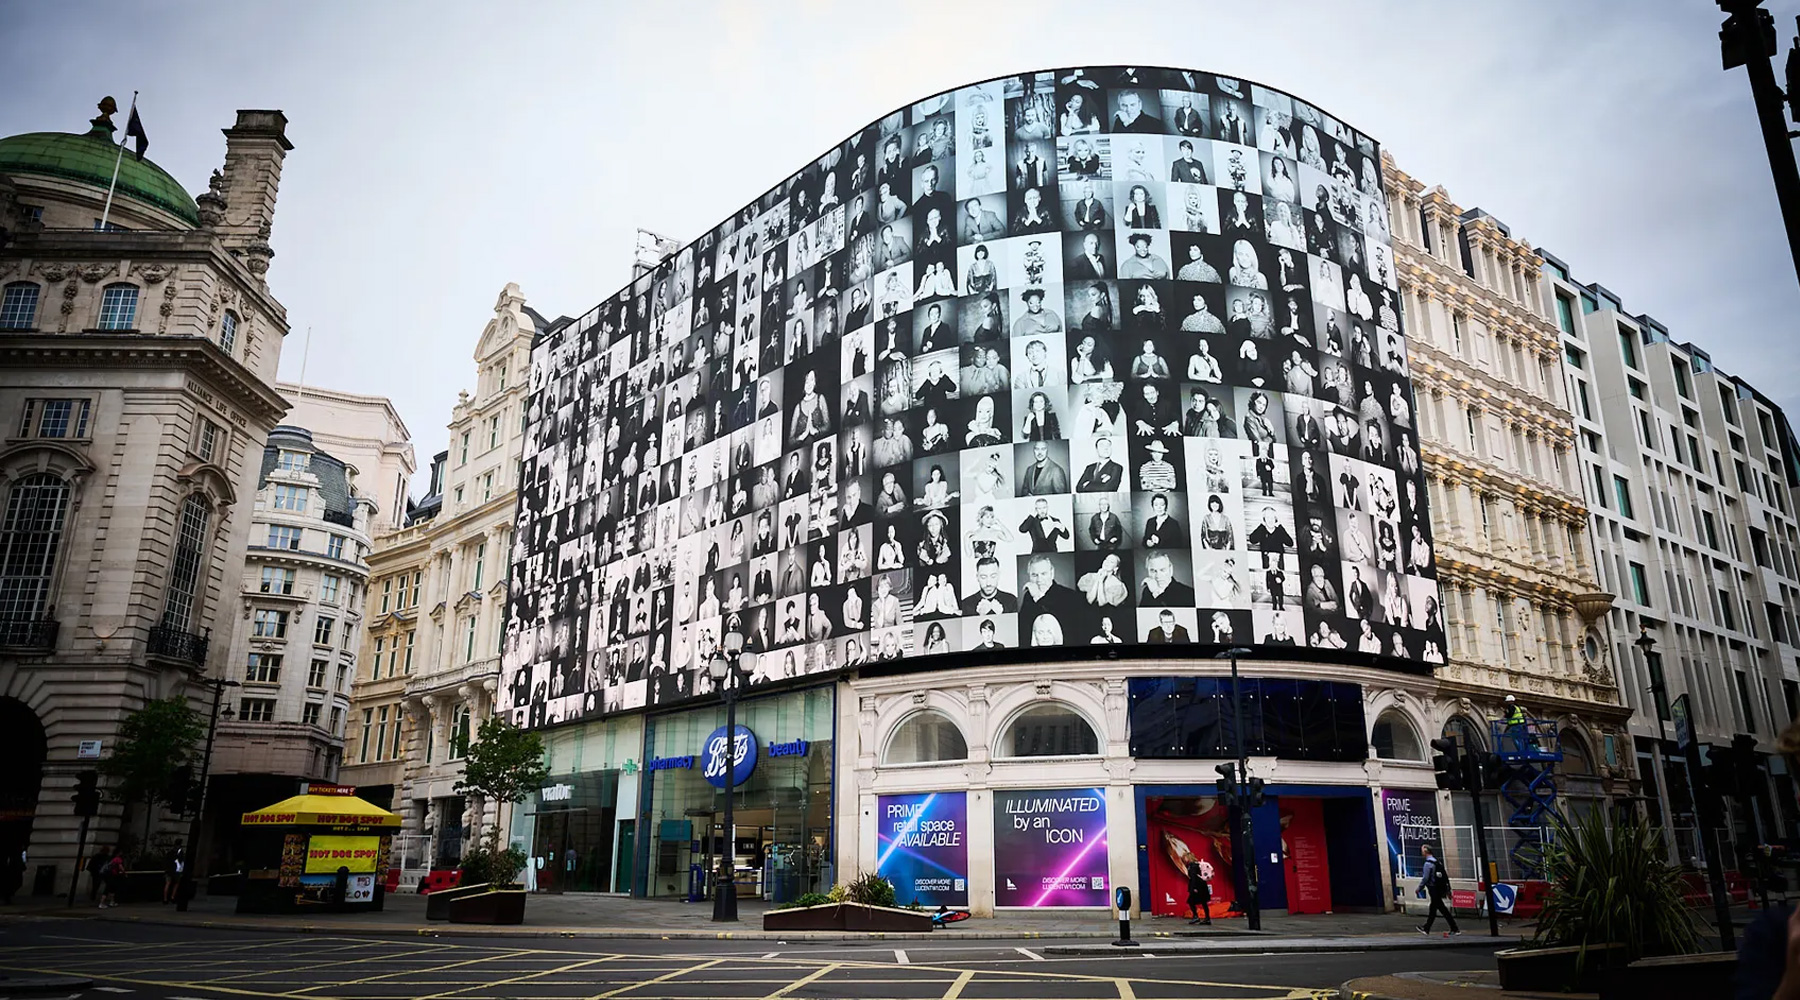 Your face could be on the Piccadilly Circus lights